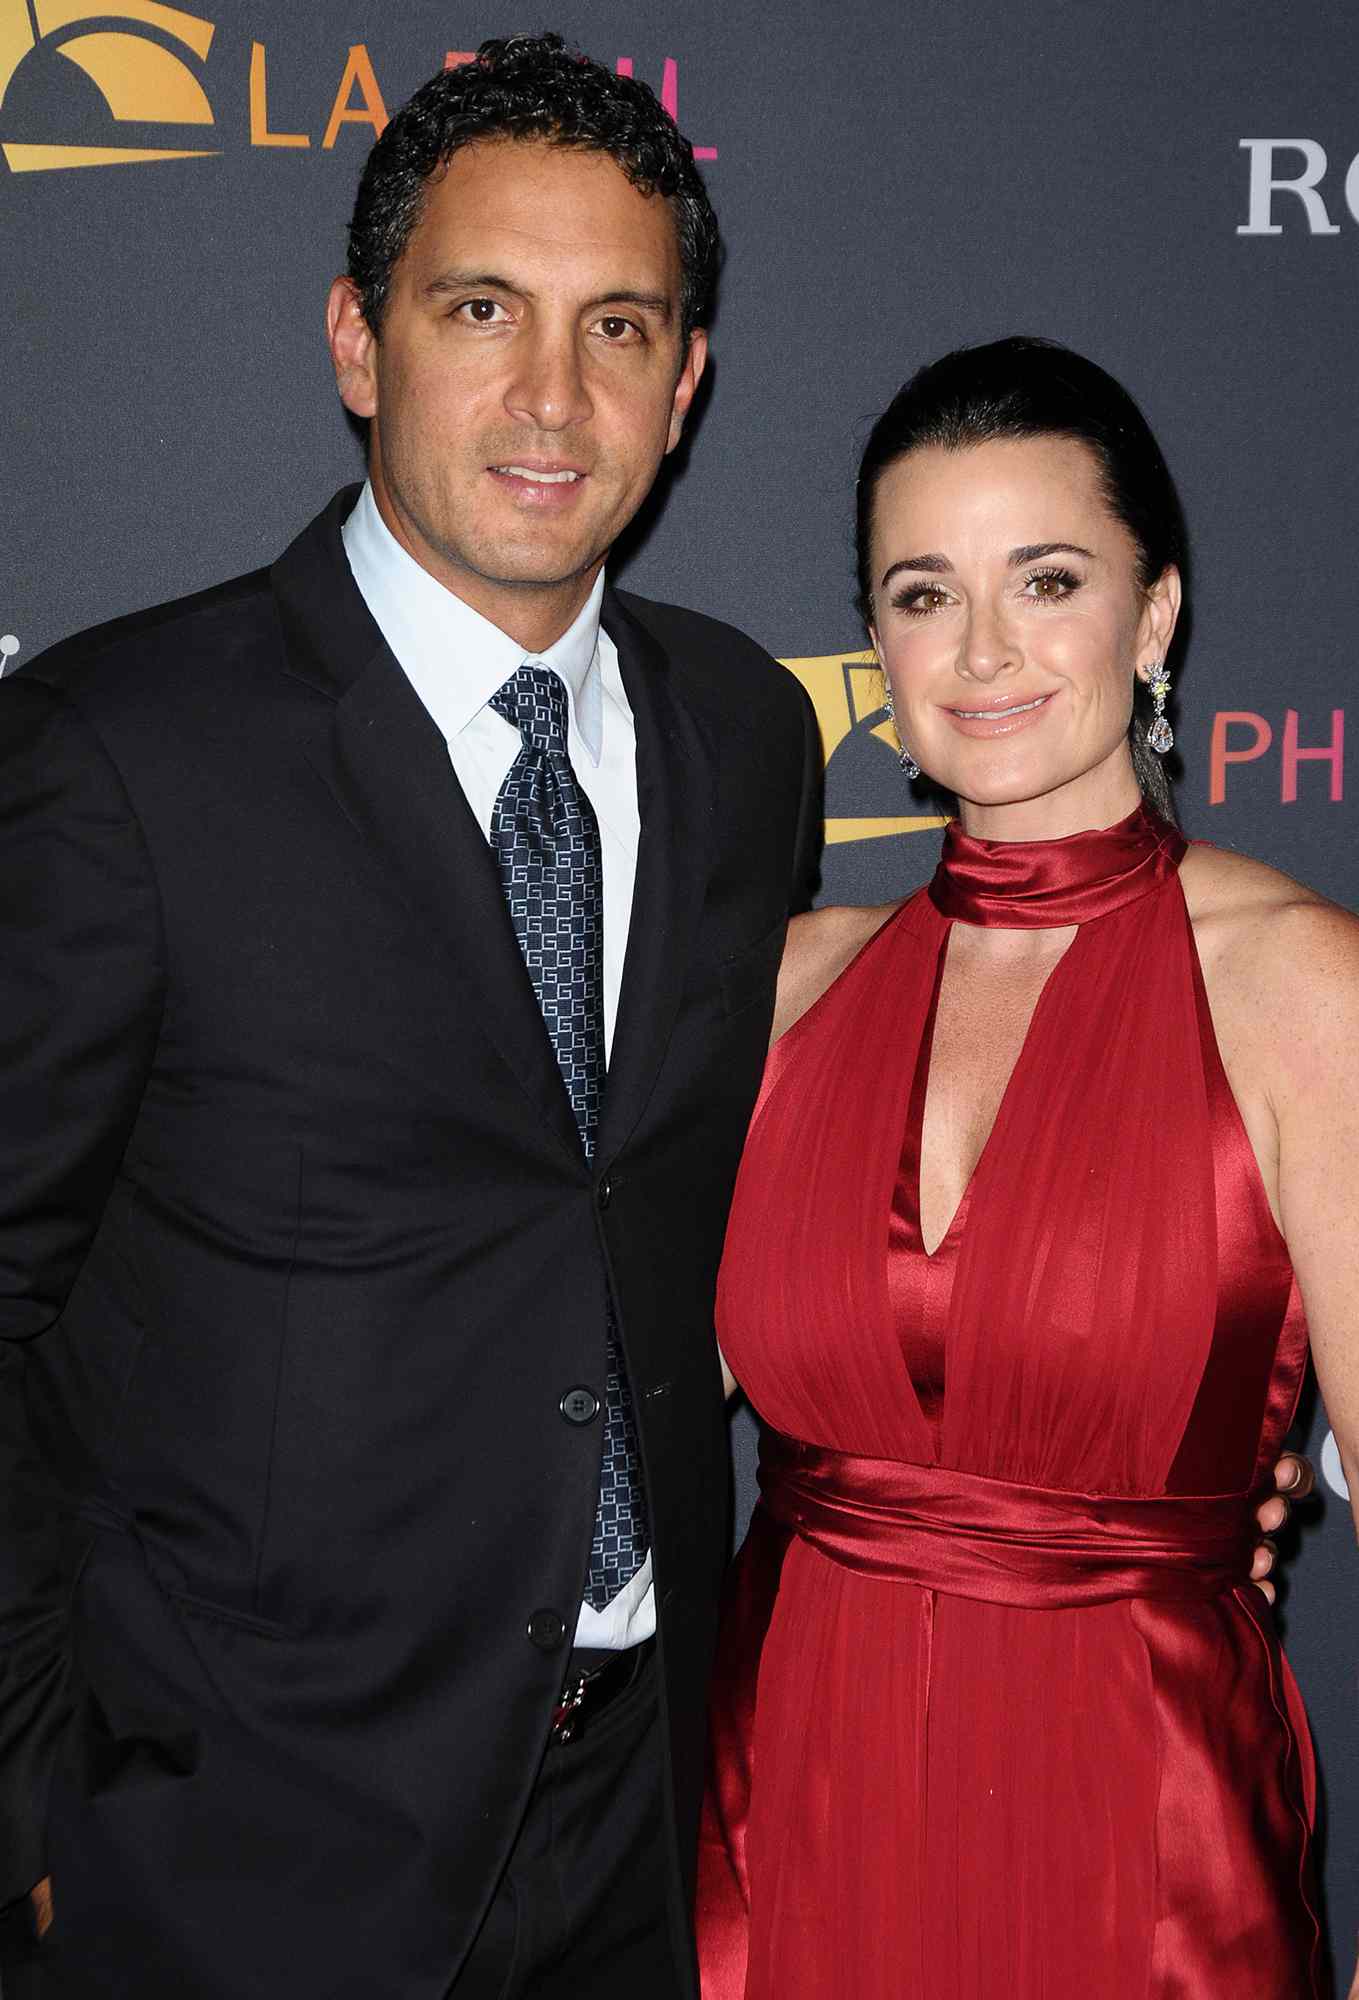 Mauricio Umansky and Kyle Richards attend the The Los Angeles Philharmonic season opening night gala at Walt Disney Concert Hall on October 7, 2010 in Los Angeles, California